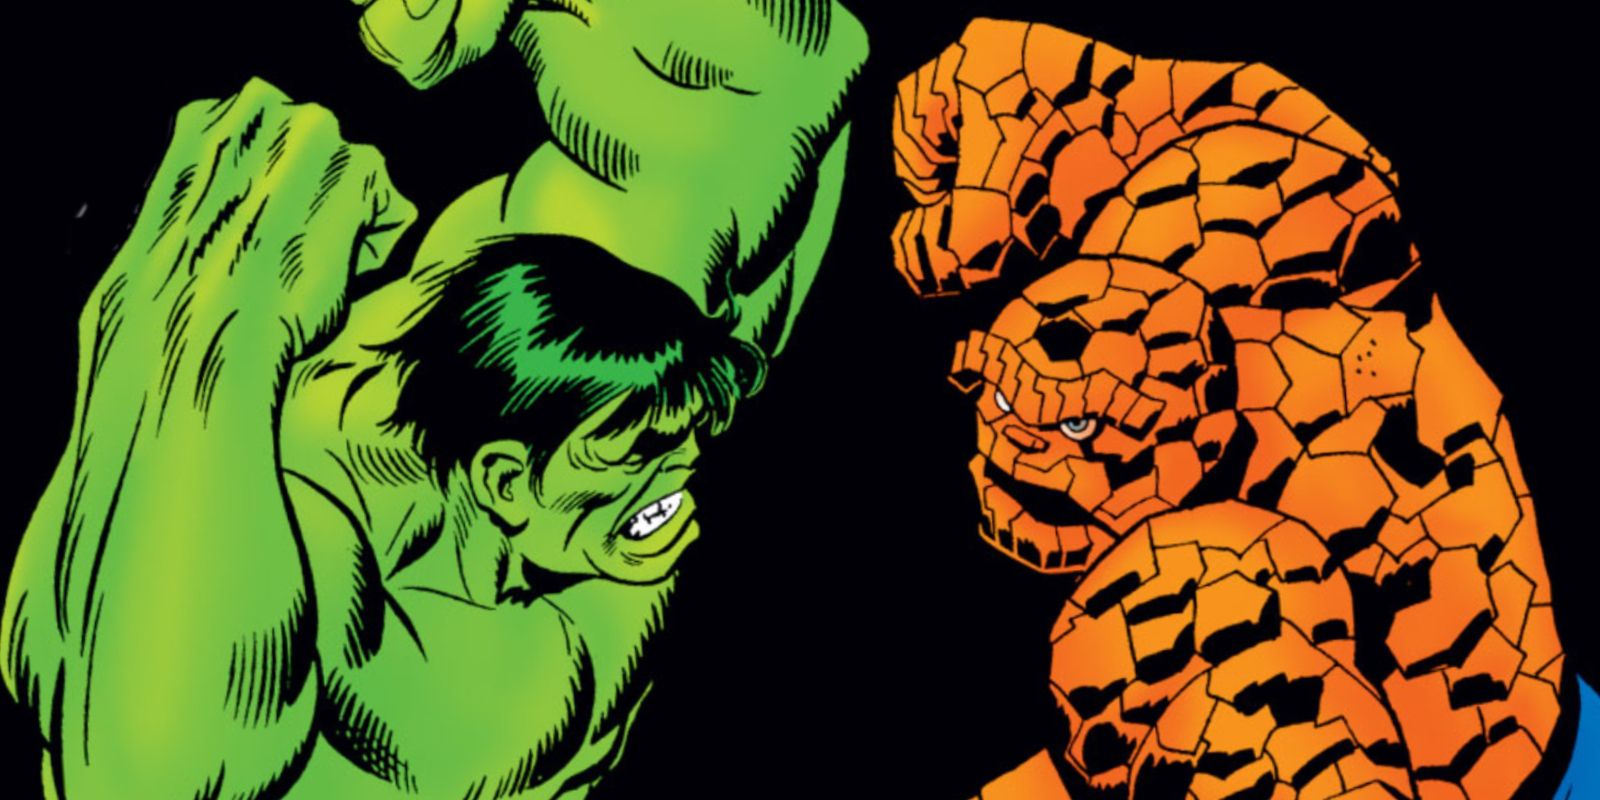 Hulk fights the Thing in Marvel Comics.